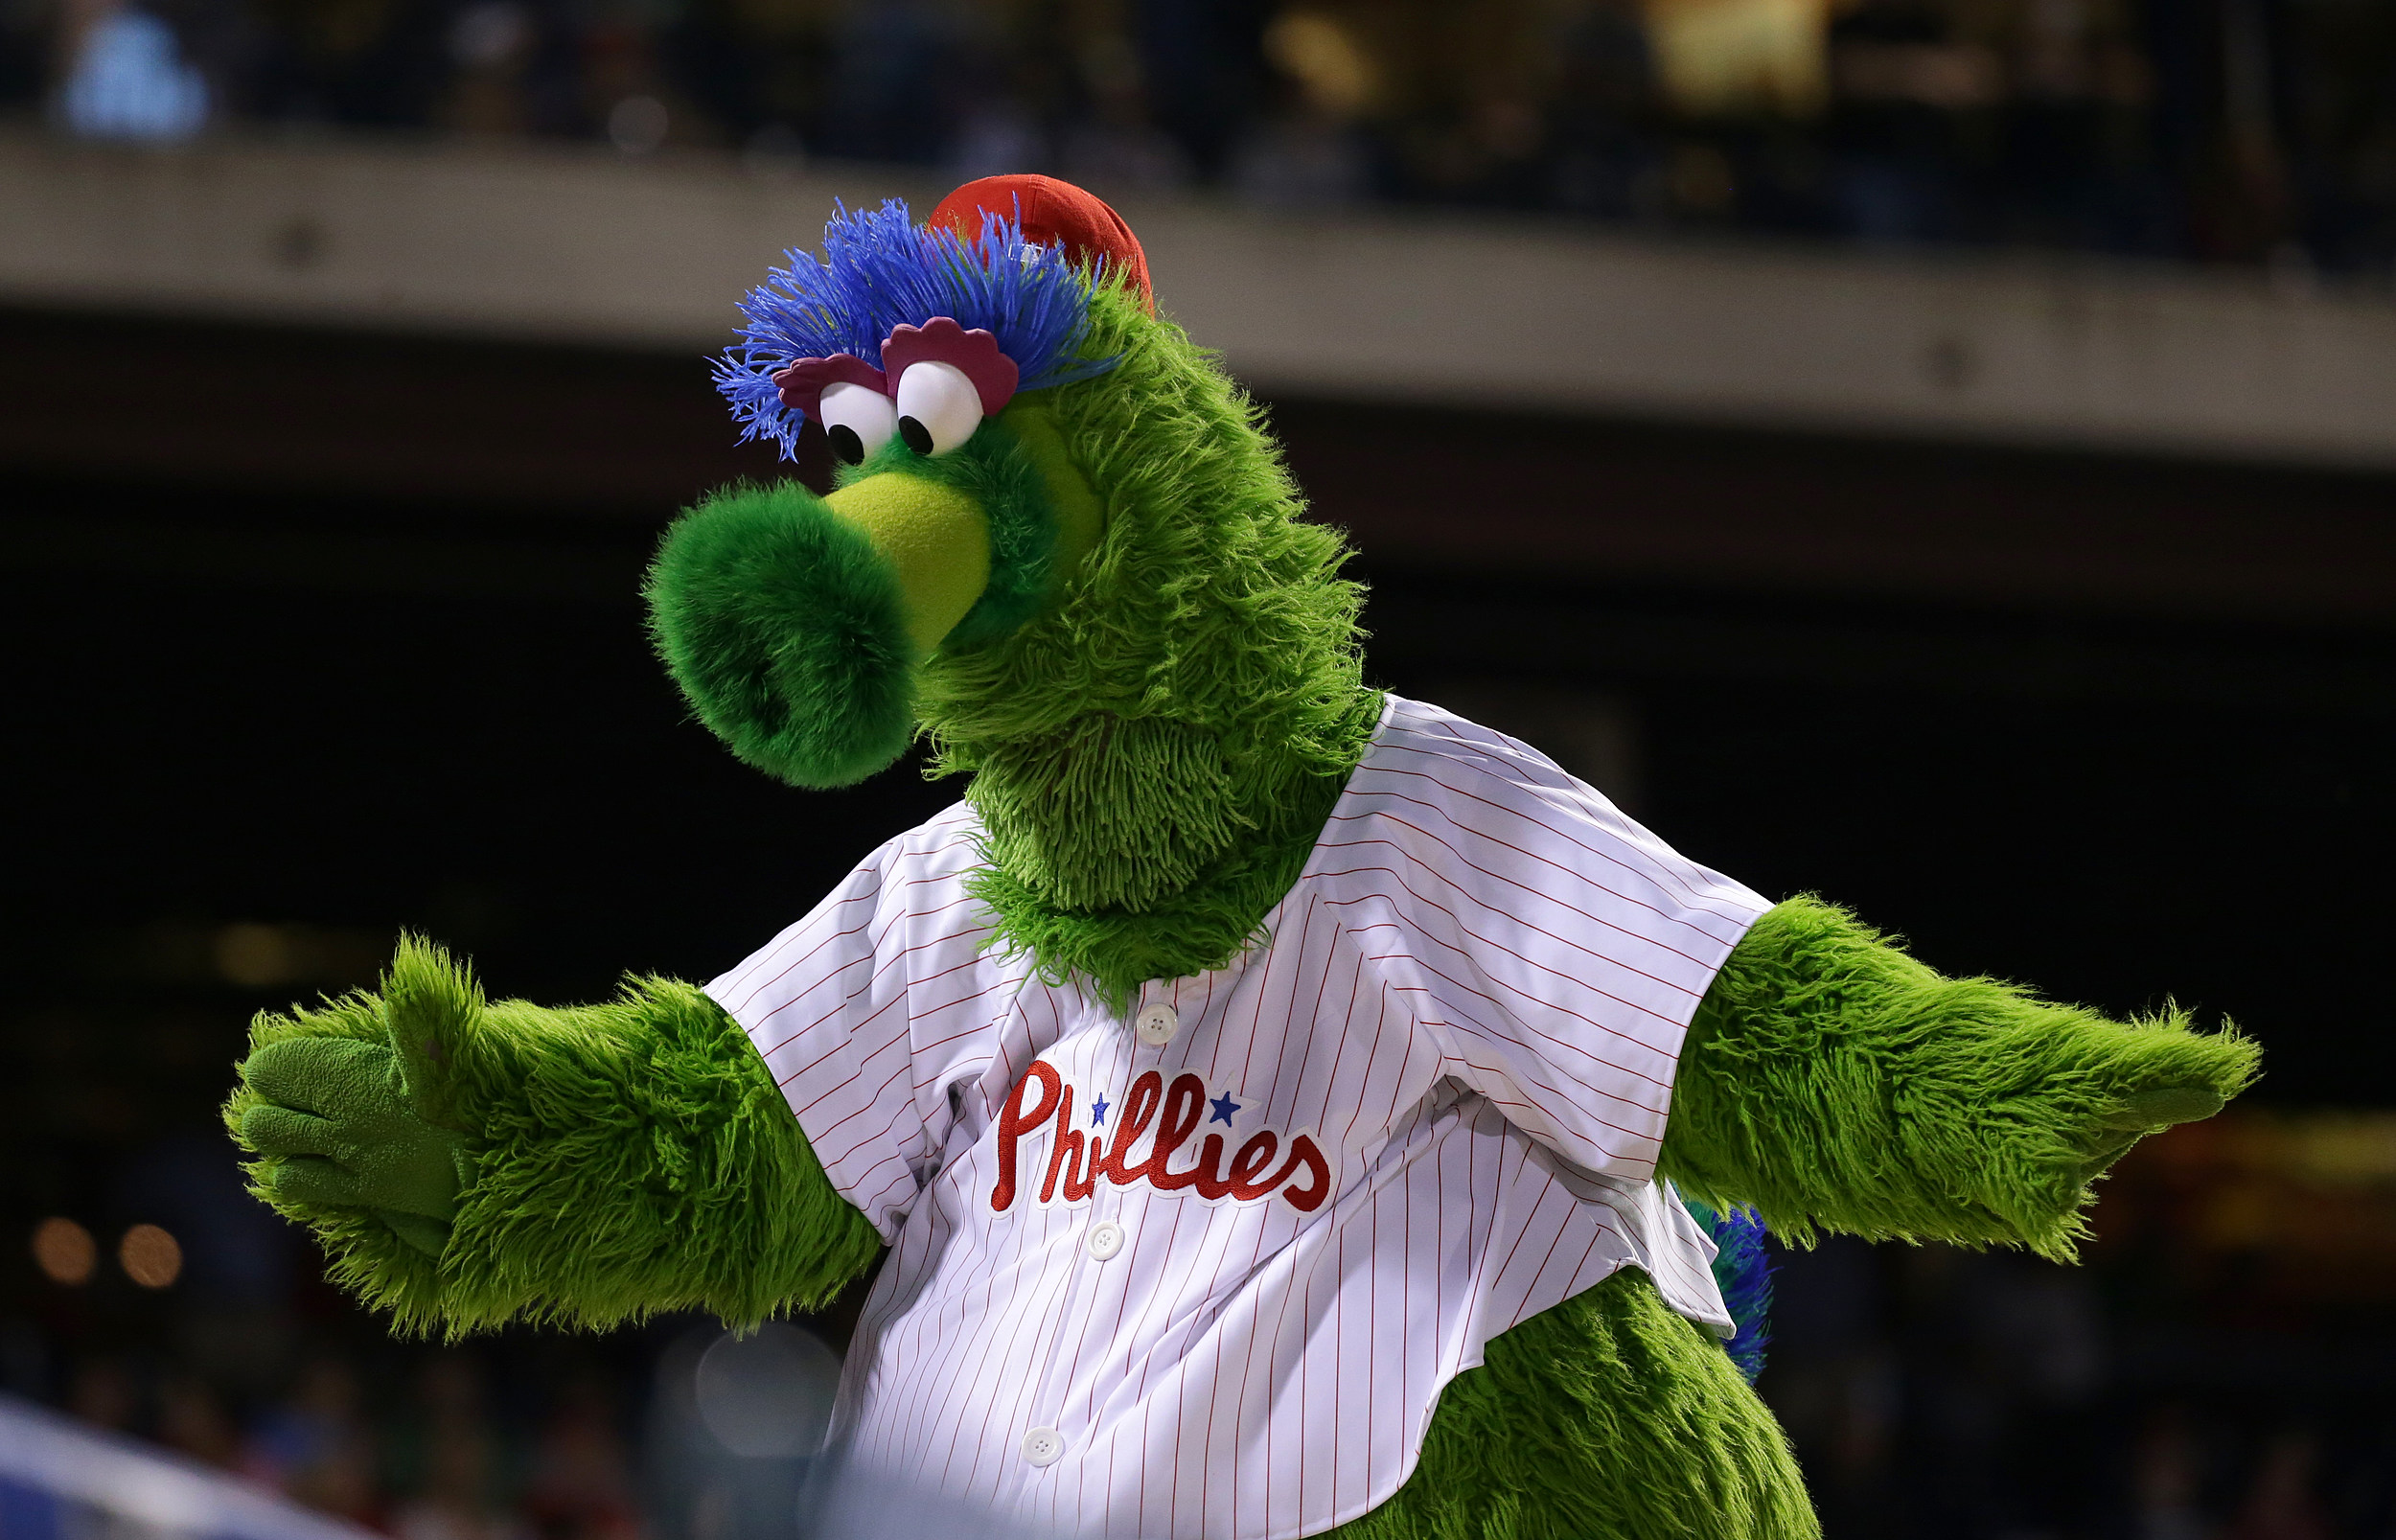 Phillie Phanatic, Mr Met, MLB mascots now permitted in parks - The